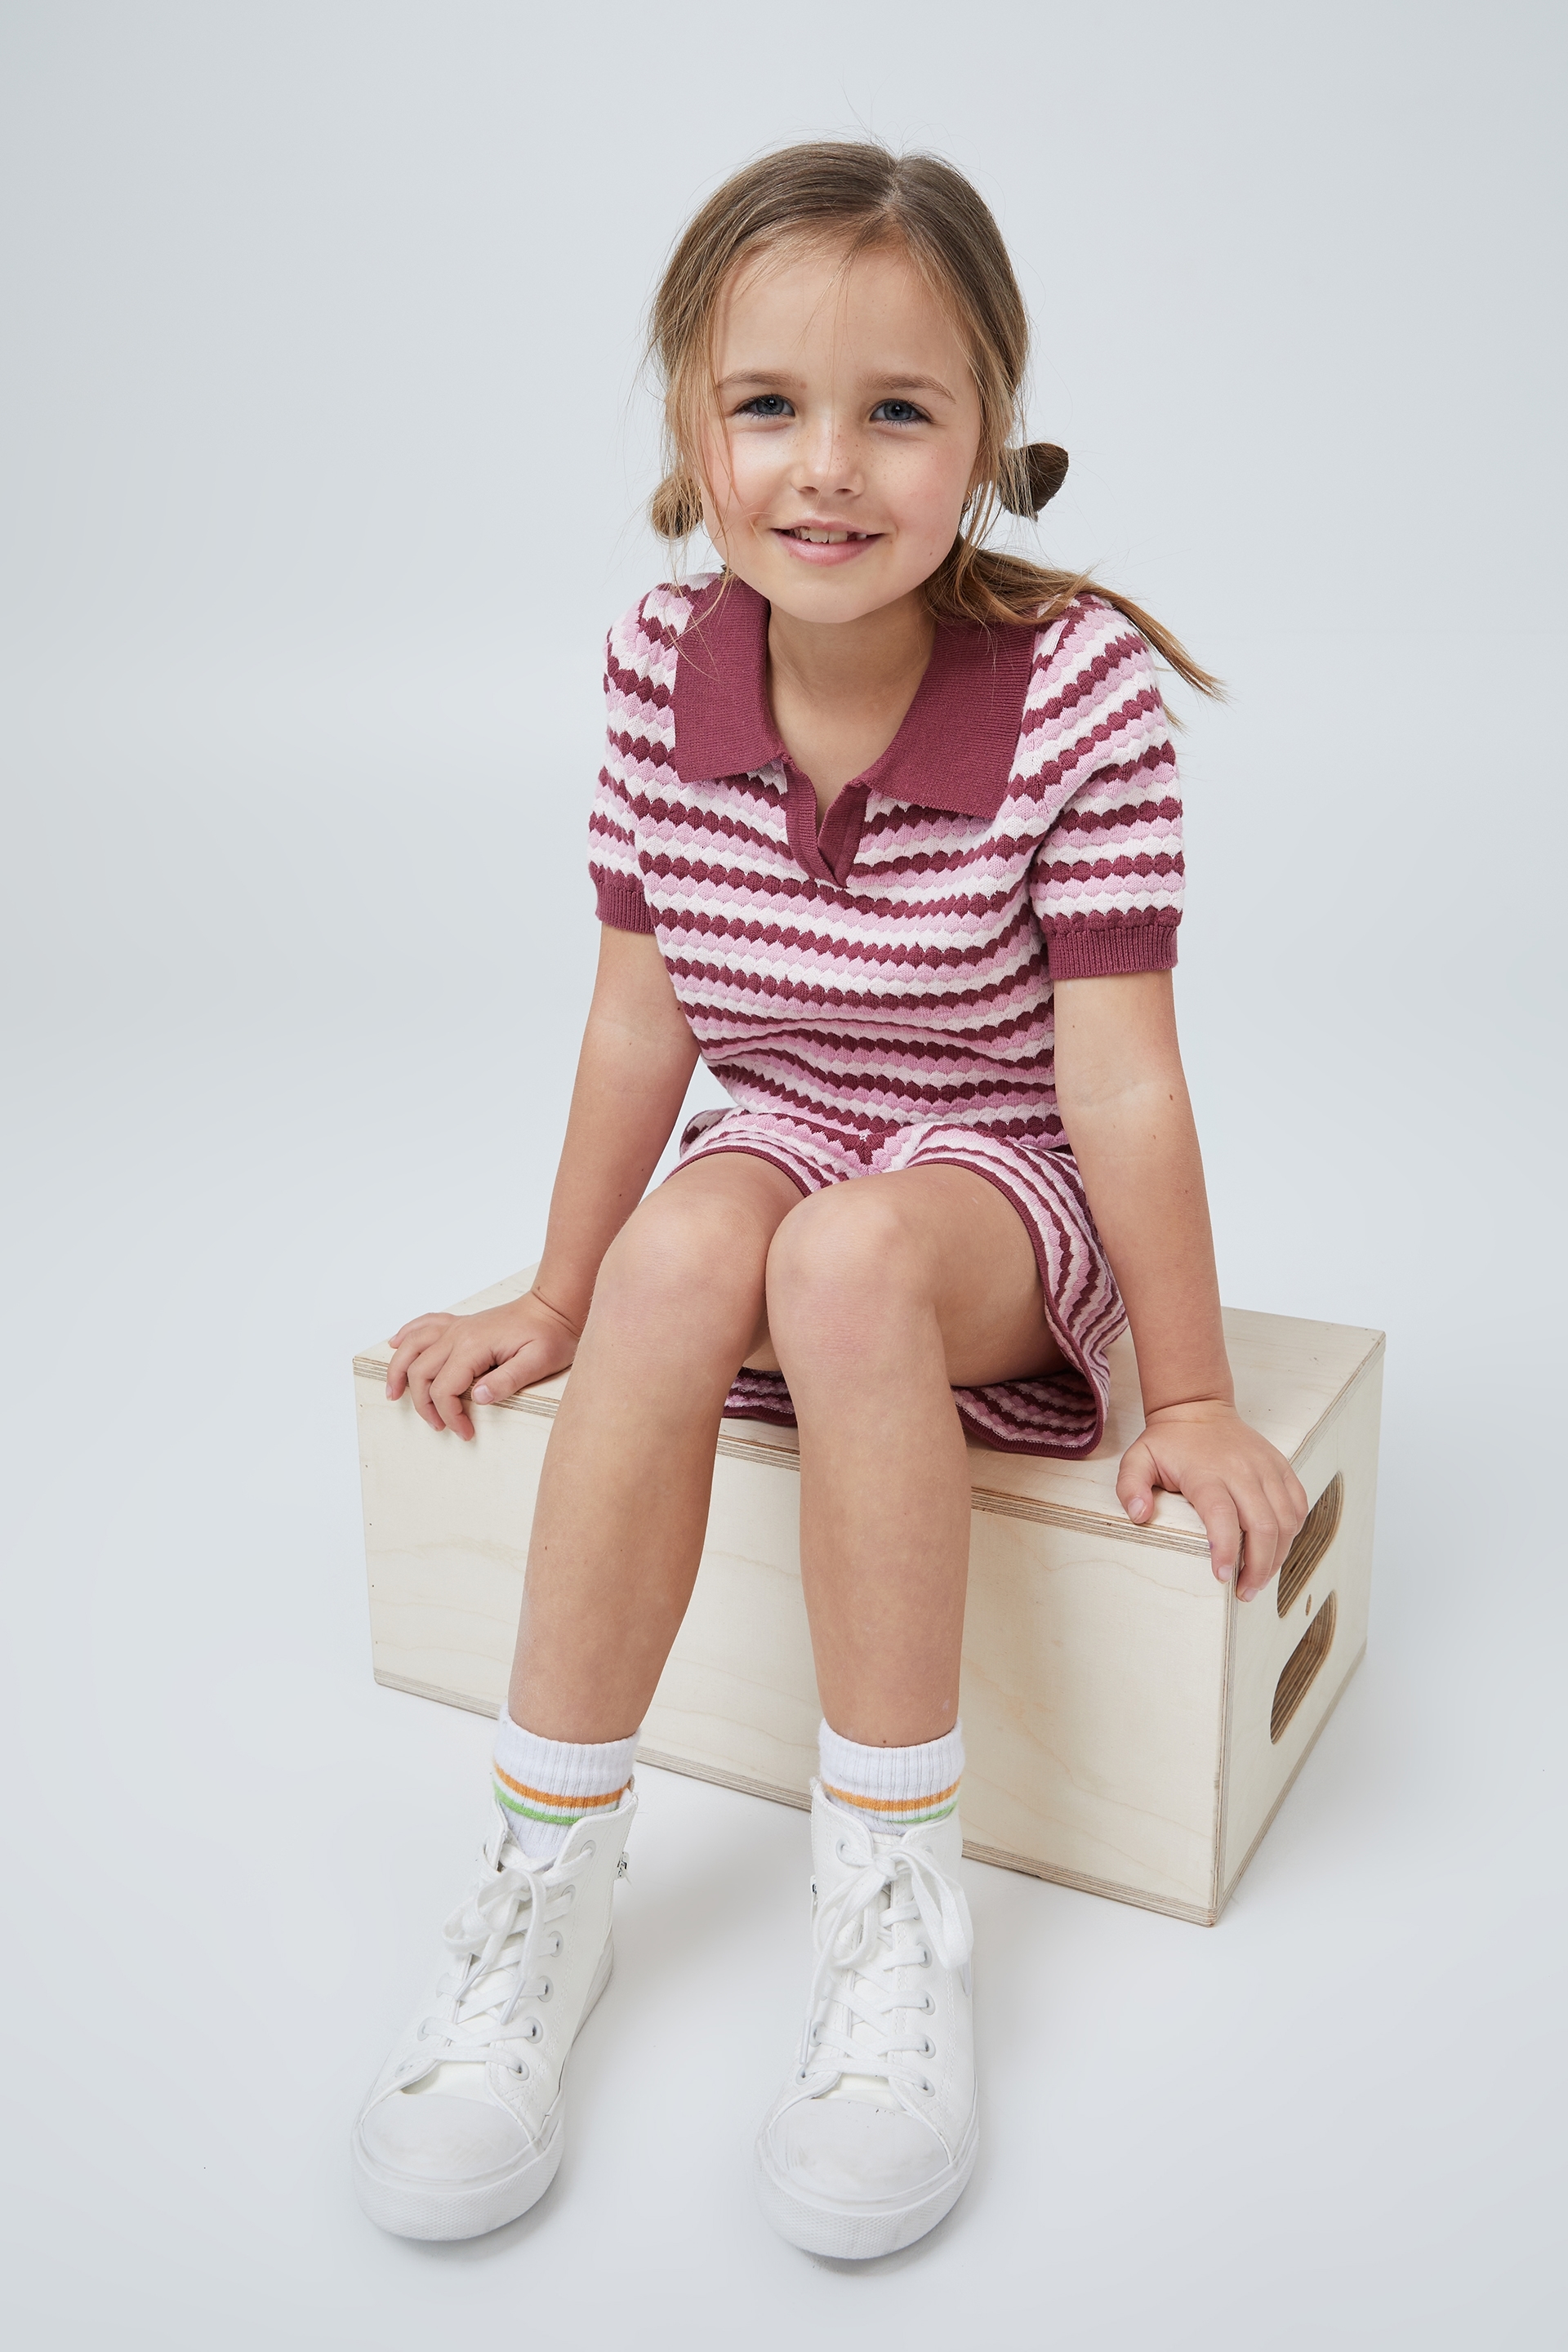 Cotton On Kids - Judy Short Sleeve Top - Crystal pink/marshmallow/vintage berry